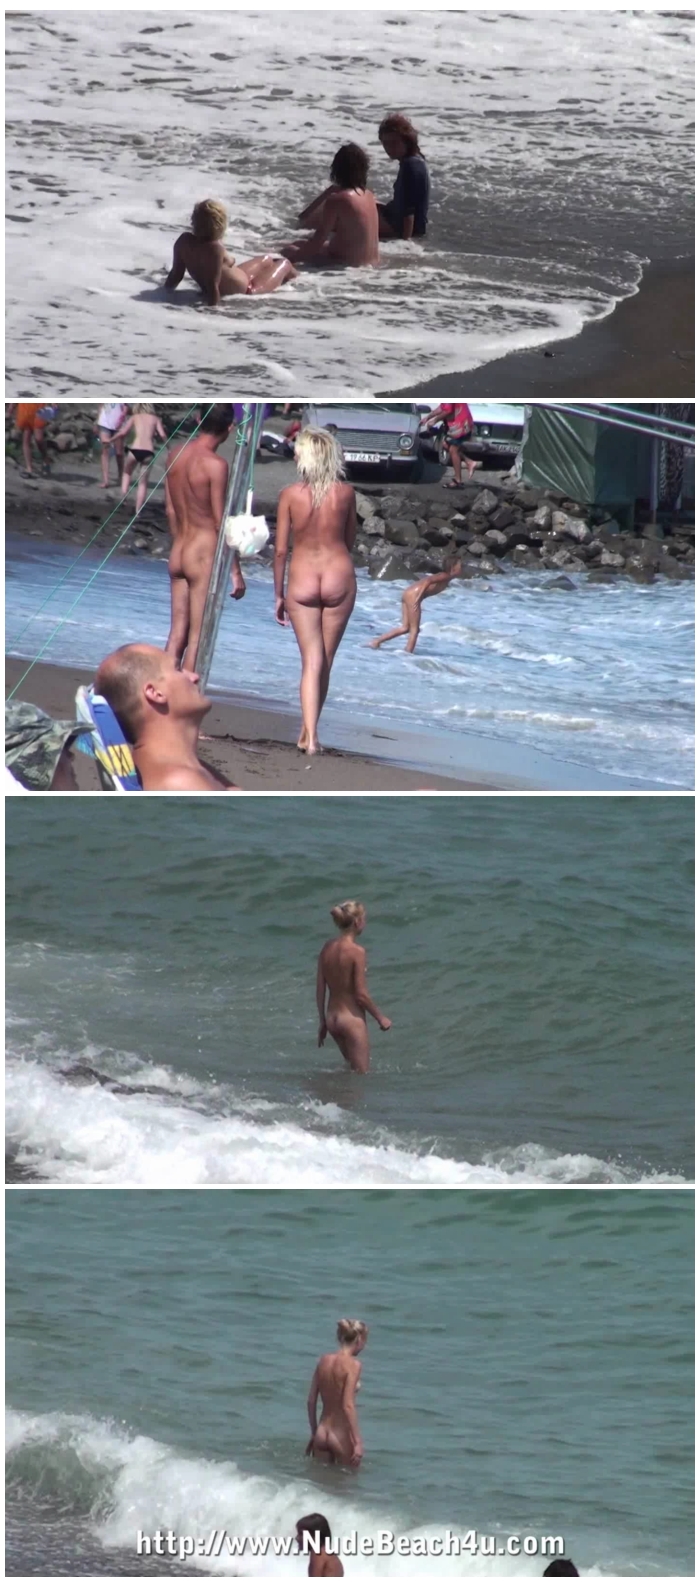 Nude Beach for You - voyeur adult Page 62 Sex-Forum picture picture